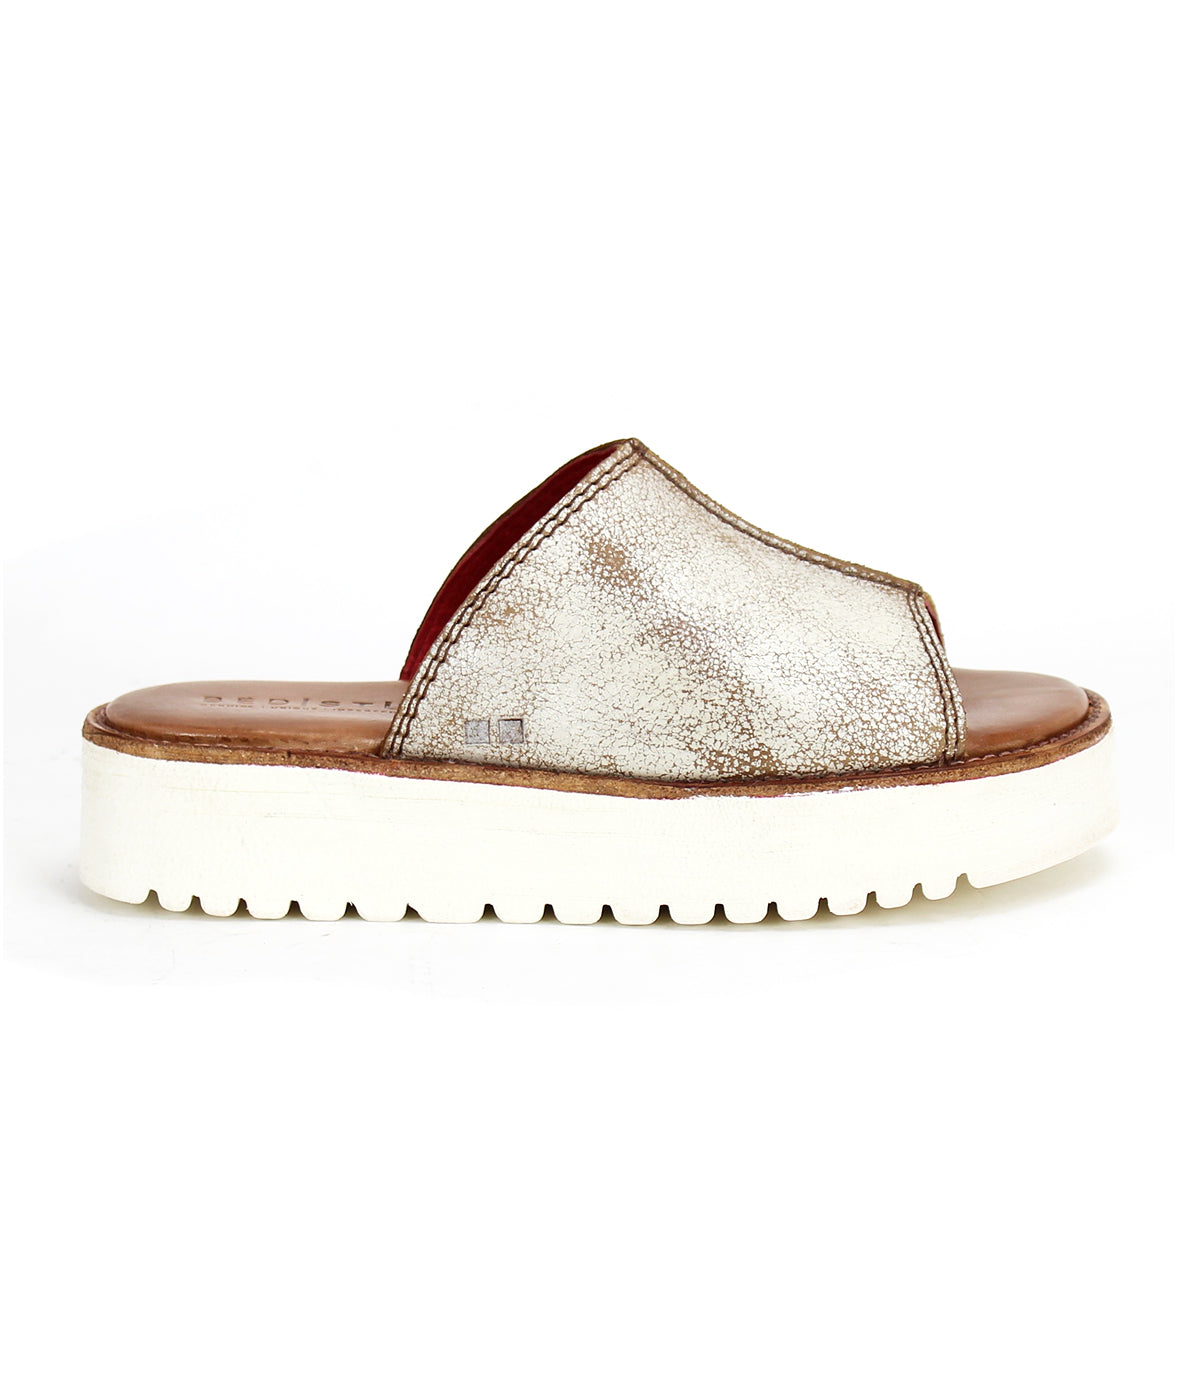 A stylish and comfortable Fairlee II leather slide sandal from Bed Stu, in white and brown.